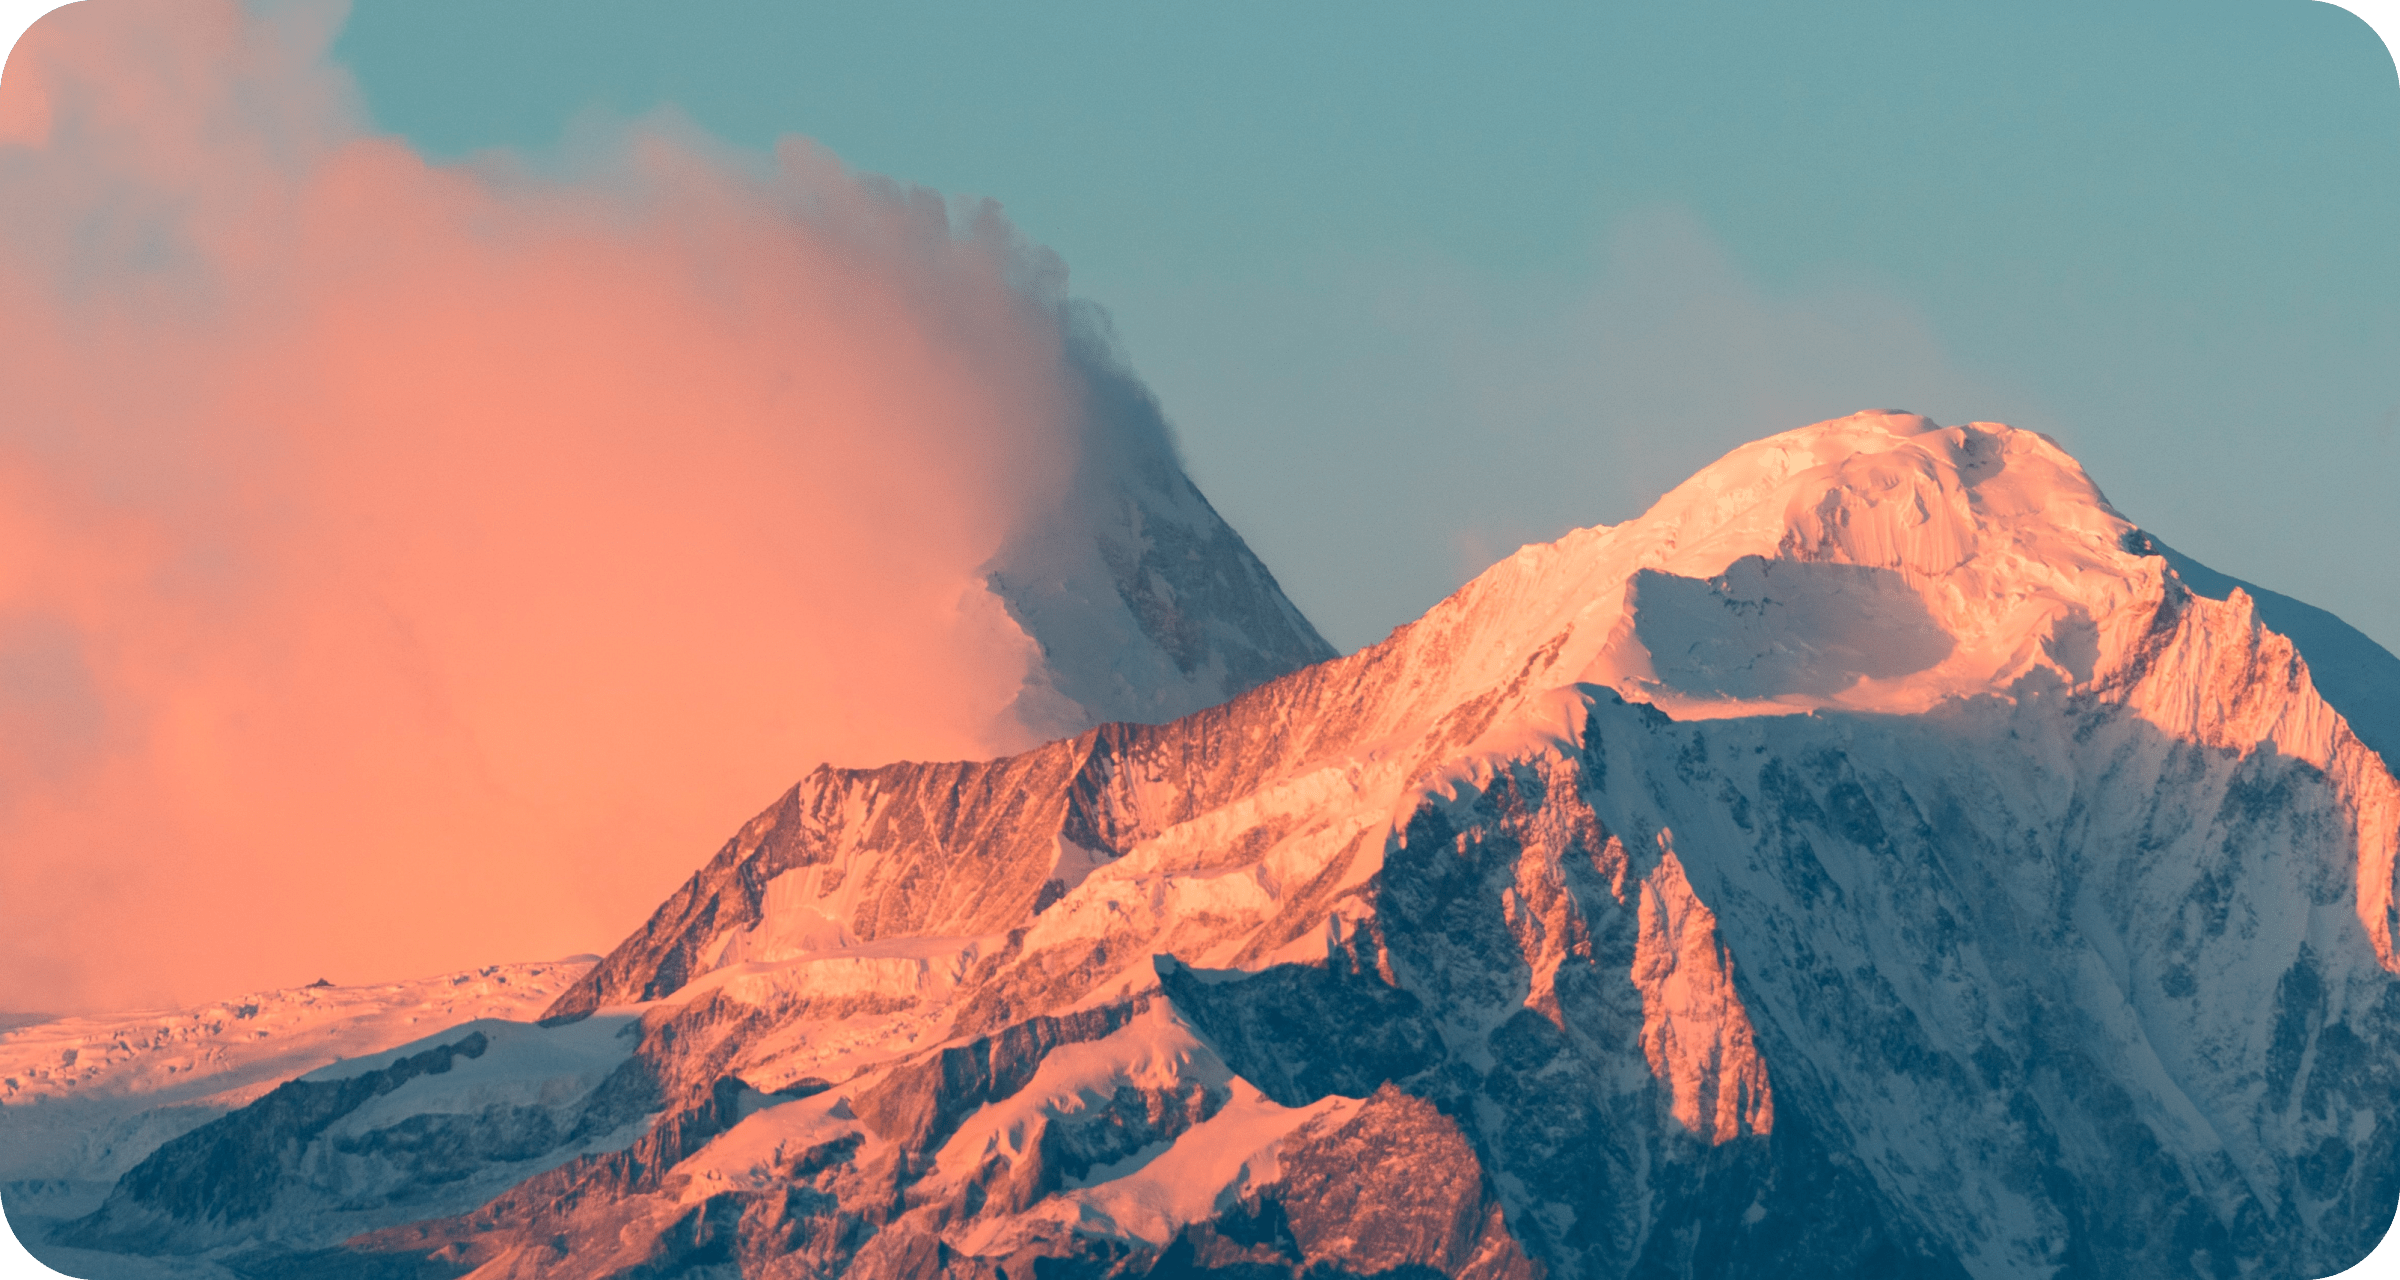 A mountain peak at sunrise, with pink lighting